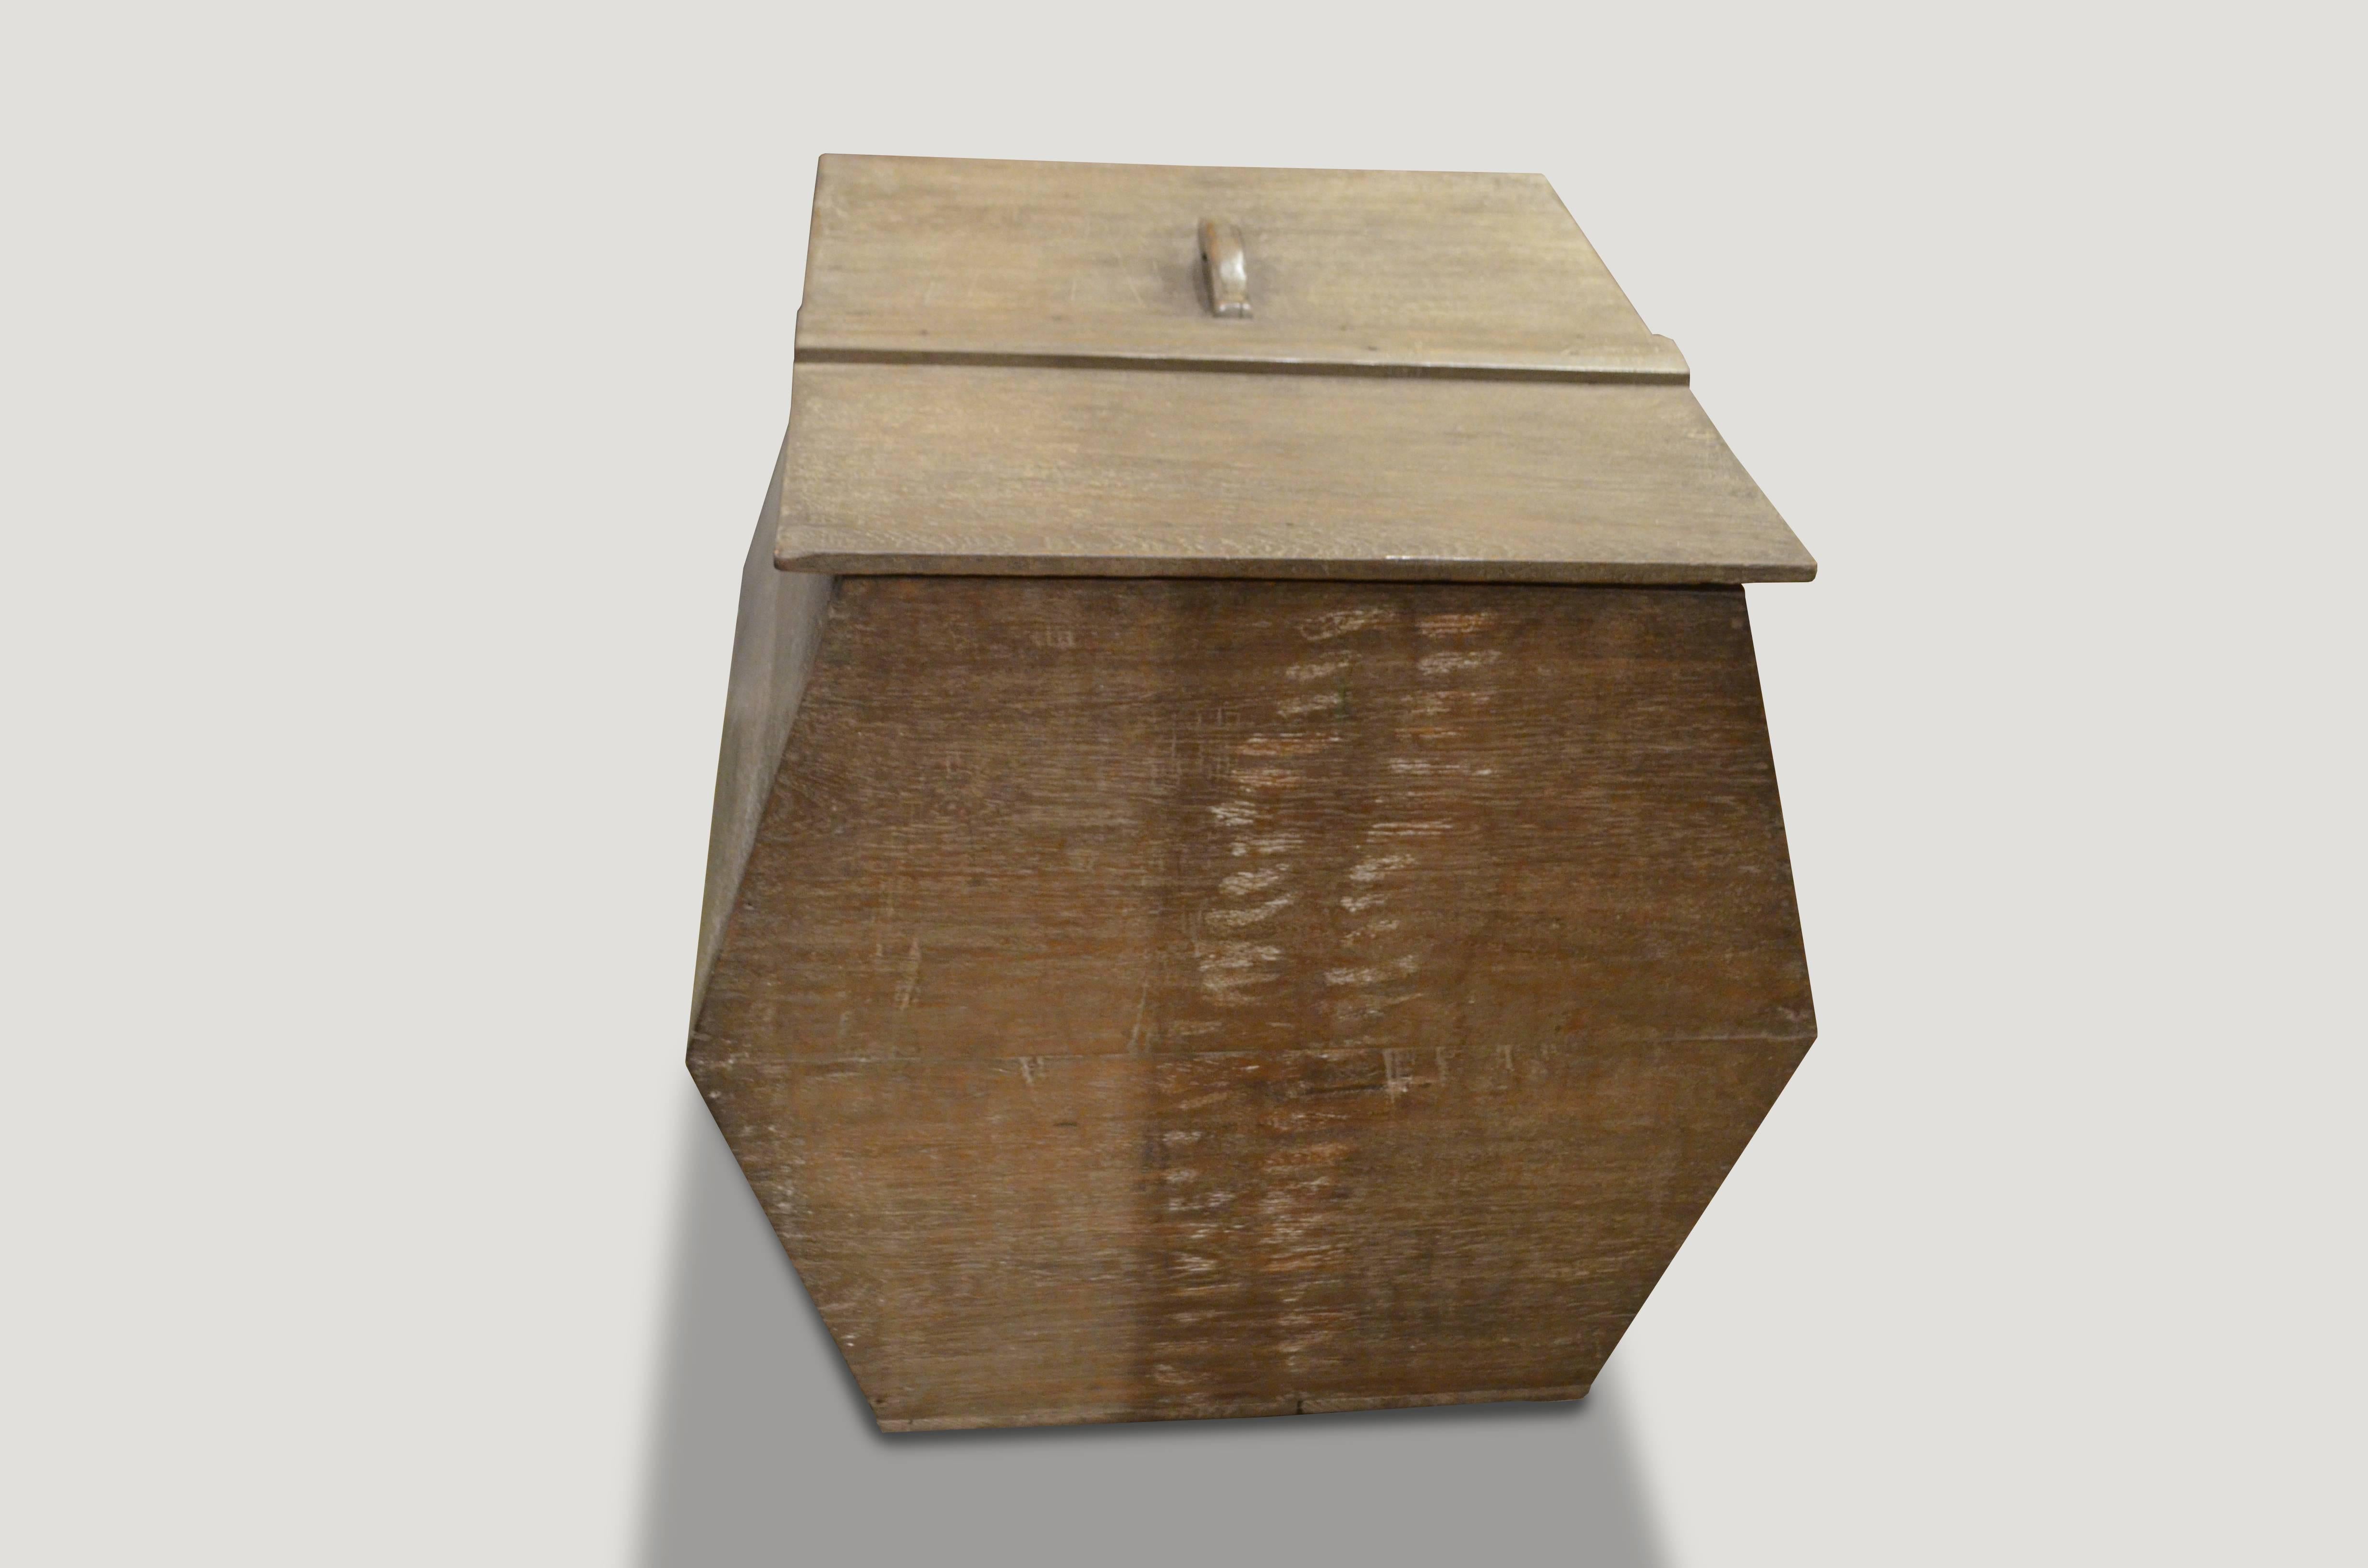 An unusual shaped wabi box originally used to store rice. Beautiful patina on an old teak wood piece.

This box was sourced in the spirit of wabi-sabi, a Japanese philosophy that beauty can be found in imperfection and impermanence. It’s a beauty